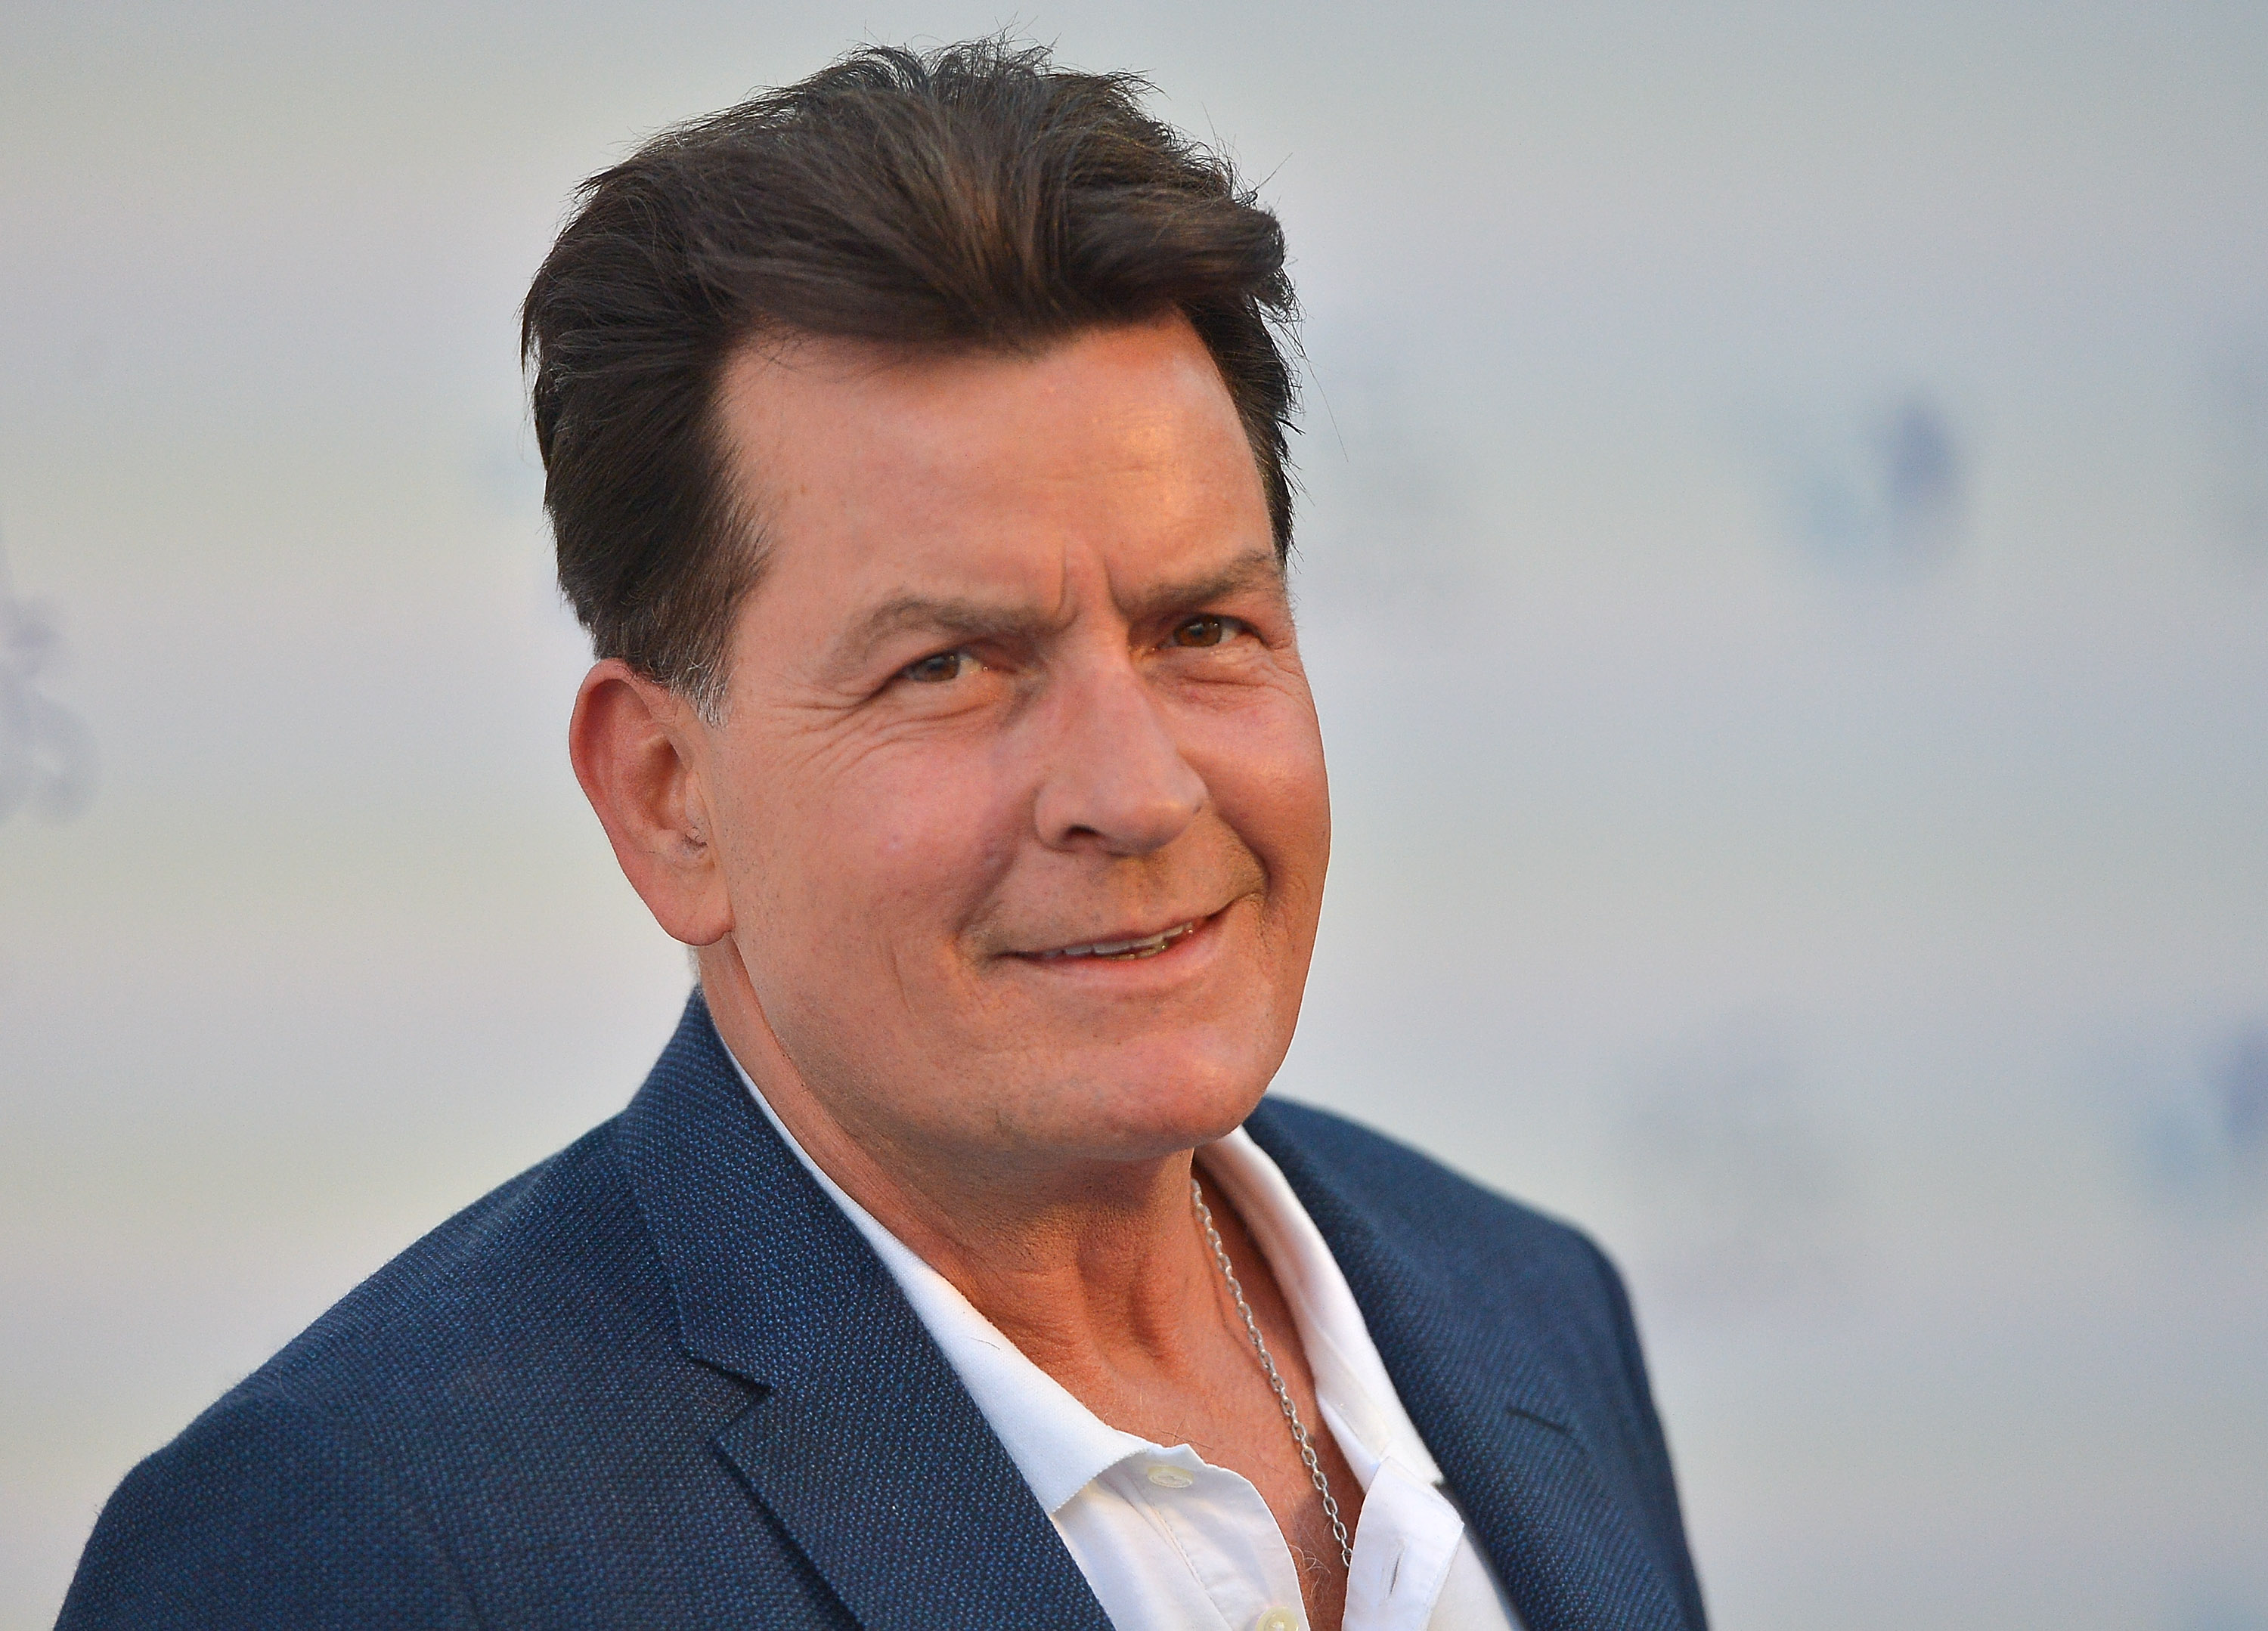 Charlie Sheen - EXCLUSIVE: Charlie Sheen's Doctor Gives HIV Health Update ... - Reddit gives you the best of the internet in one place.